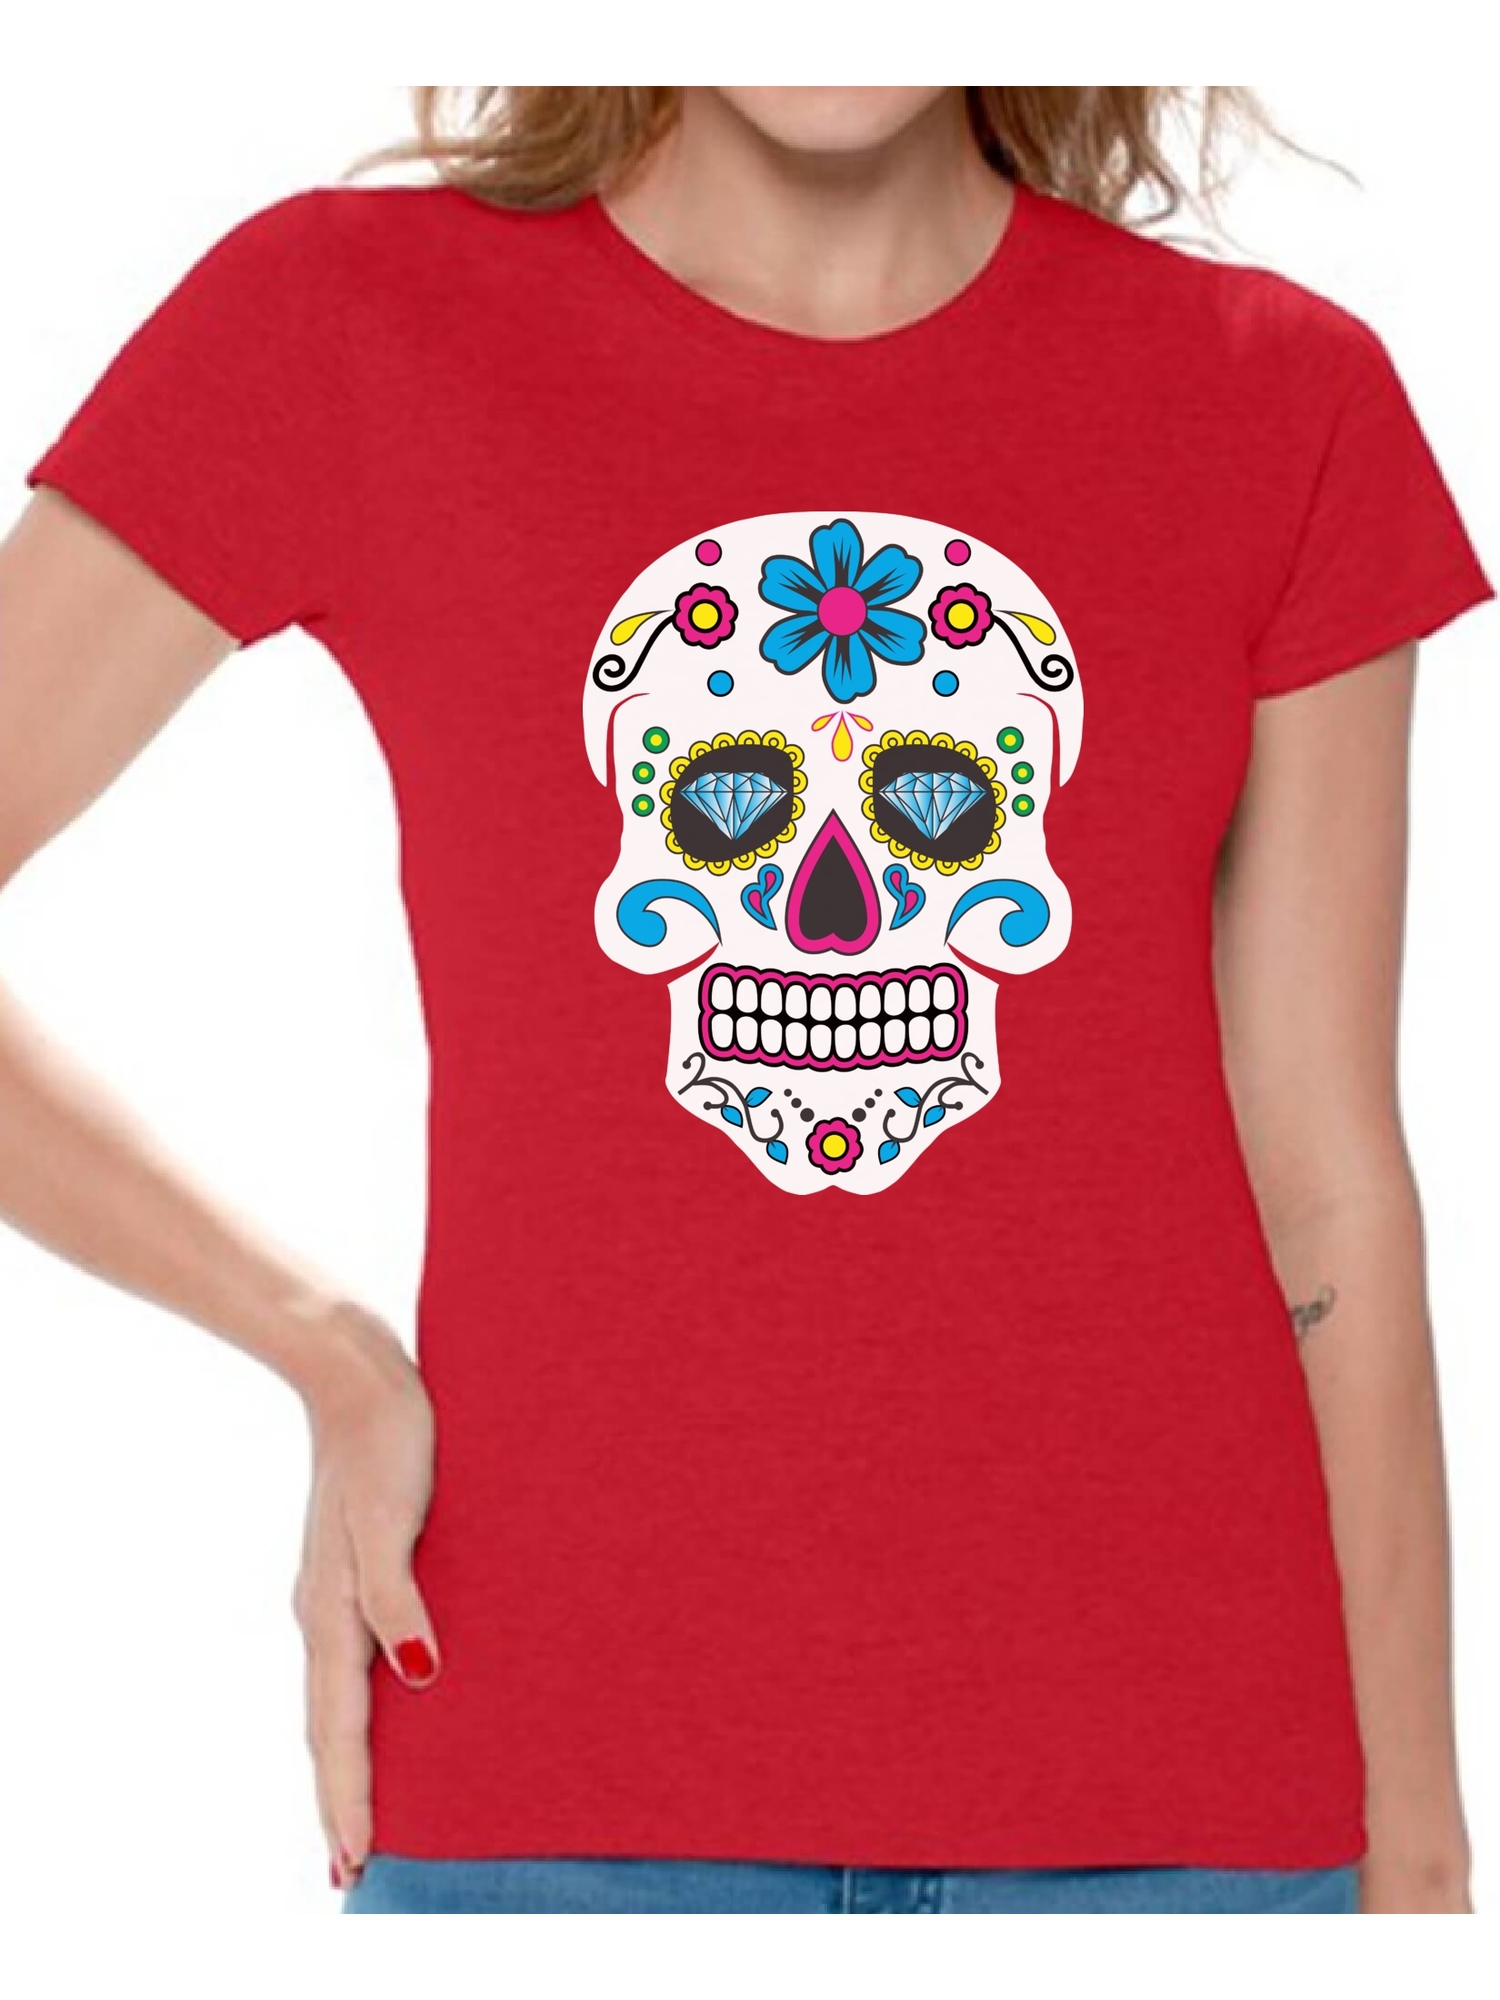 Awkward Styles Women's Colorful Skull Graphic T-shirt Tops Candy Skull Dia De Los Muertos - image 1 of 4